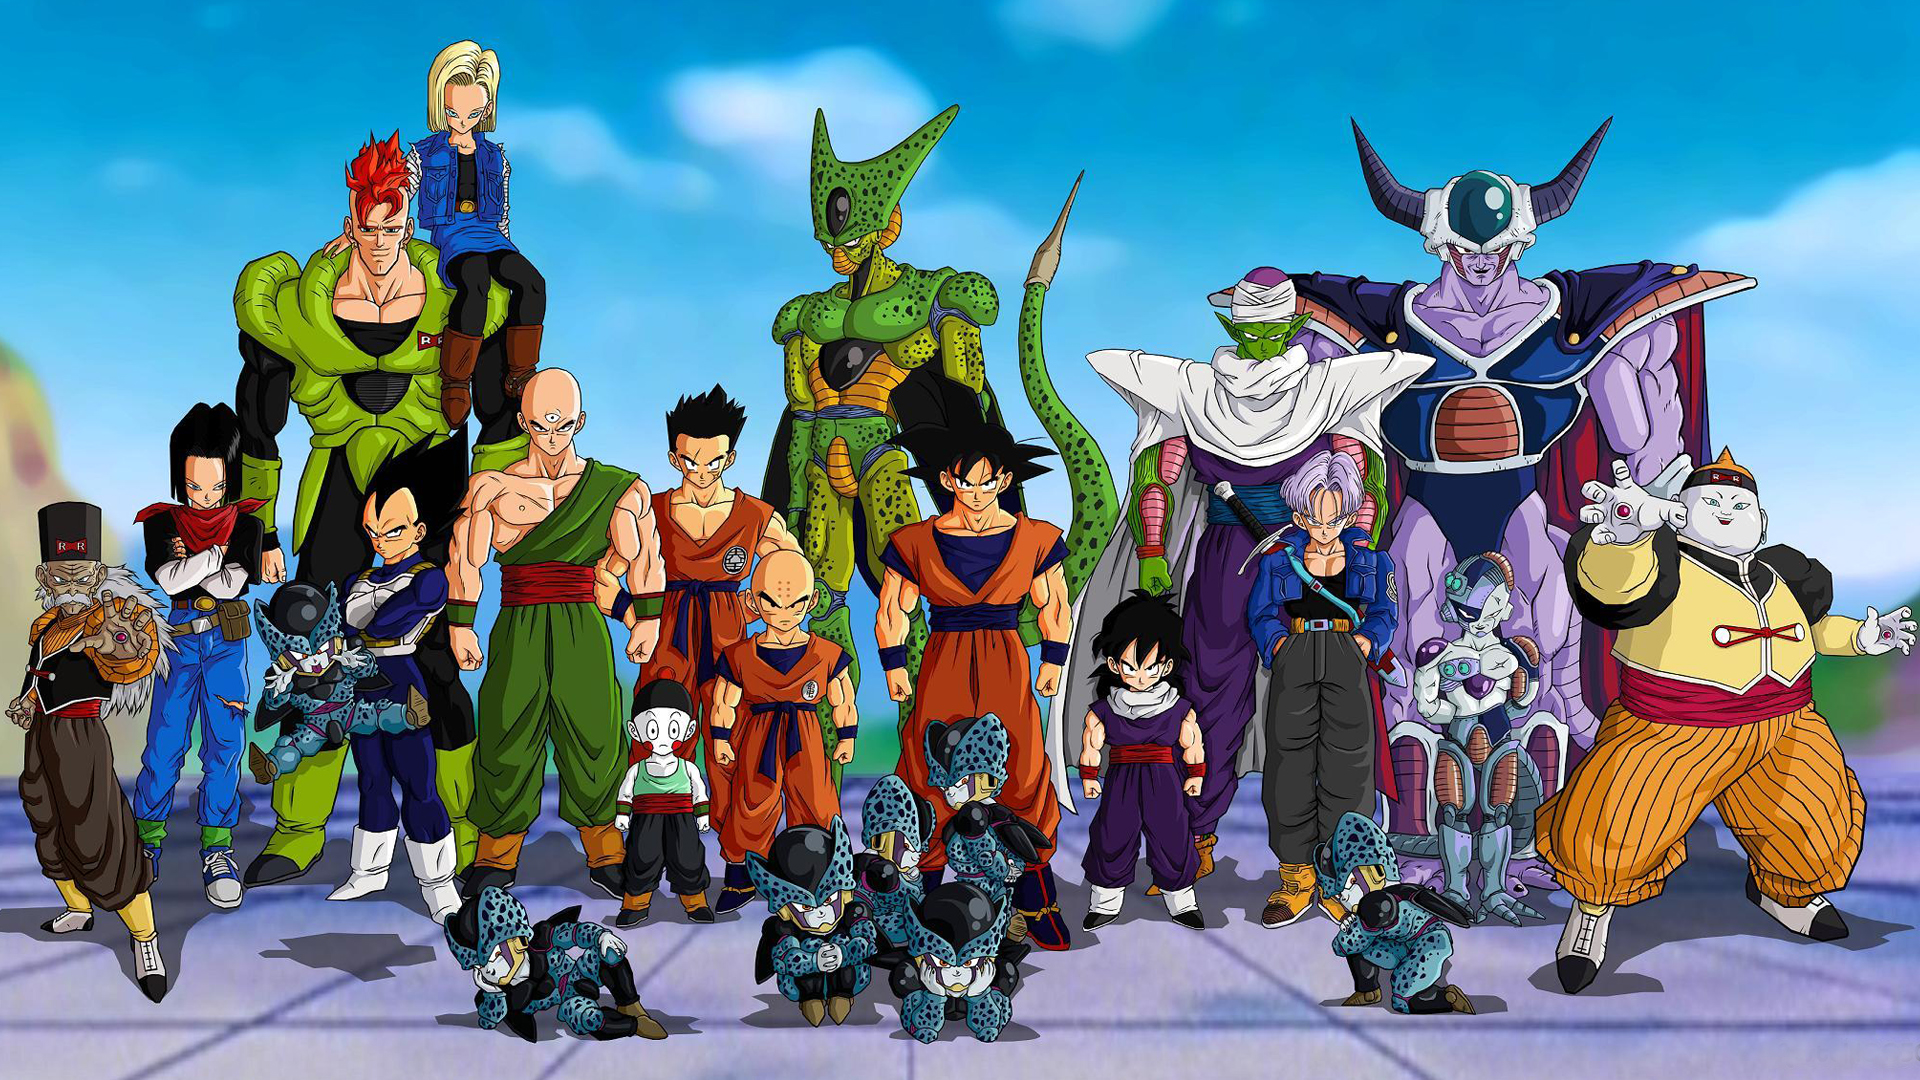 Best 20 Pictures of Dragon Ball Z 08 All Characters of Allies and 